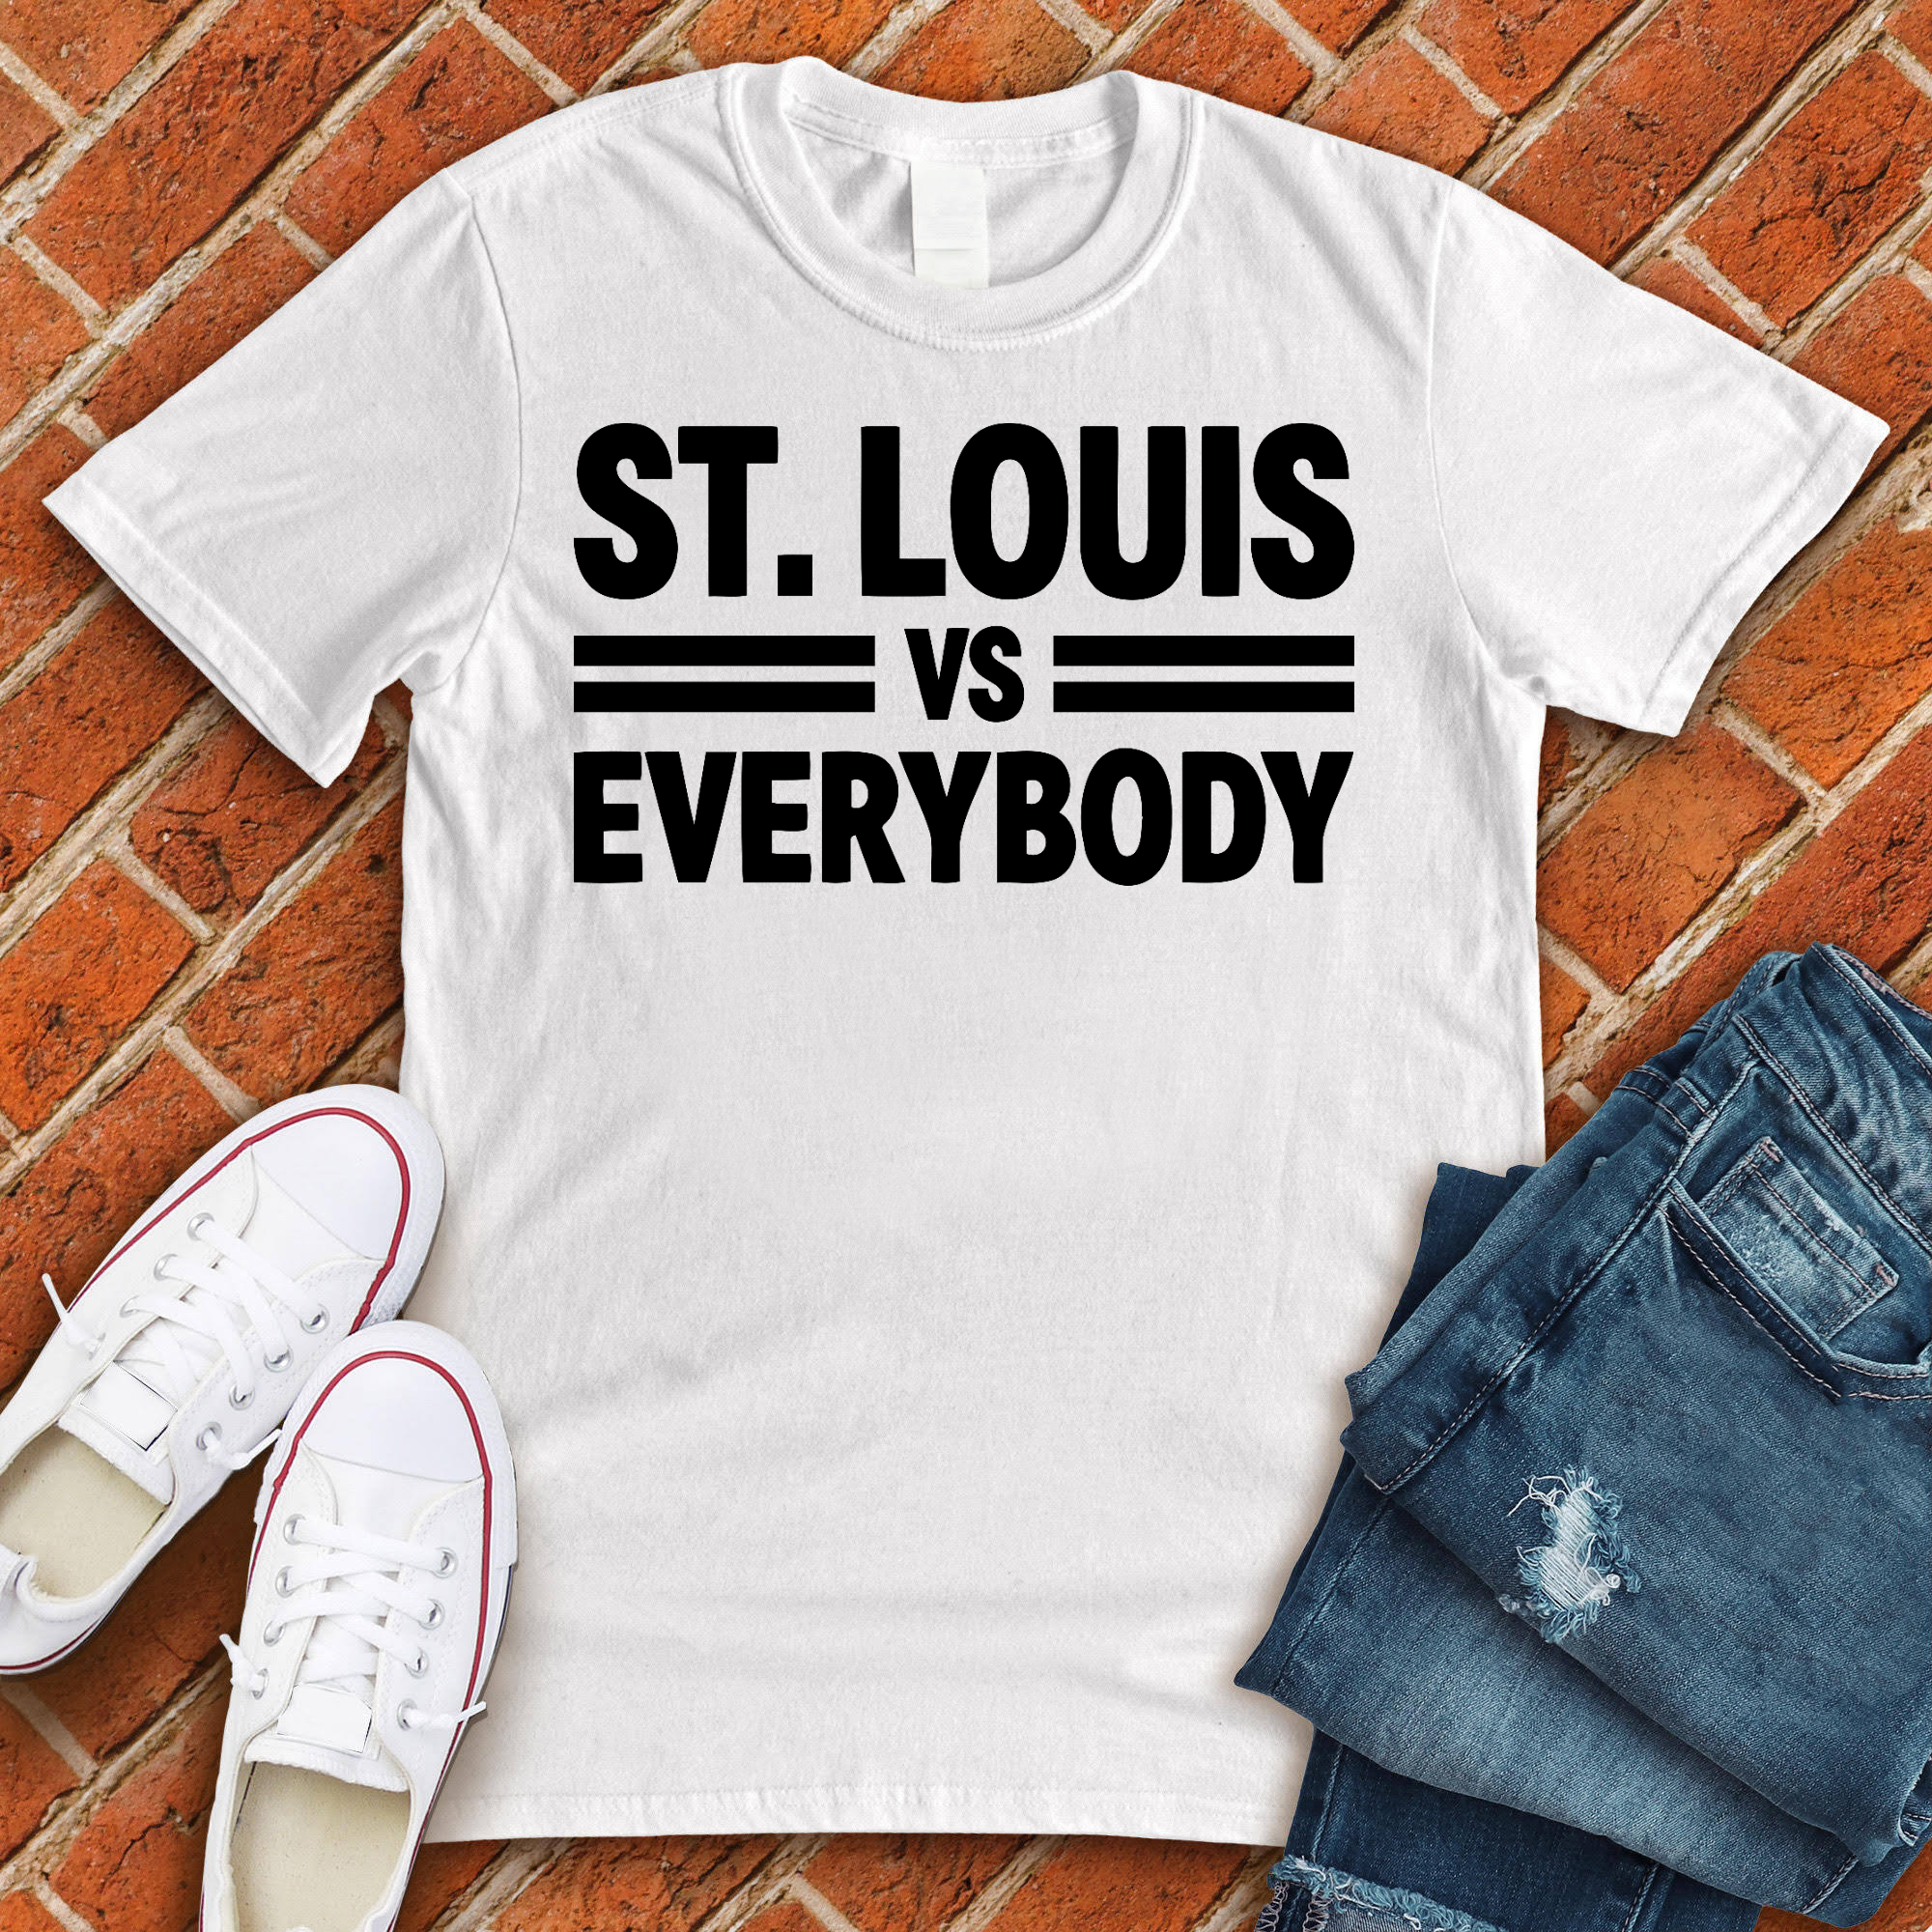 St Louis vs Everybody graphic tees – Leg4cy The Brand